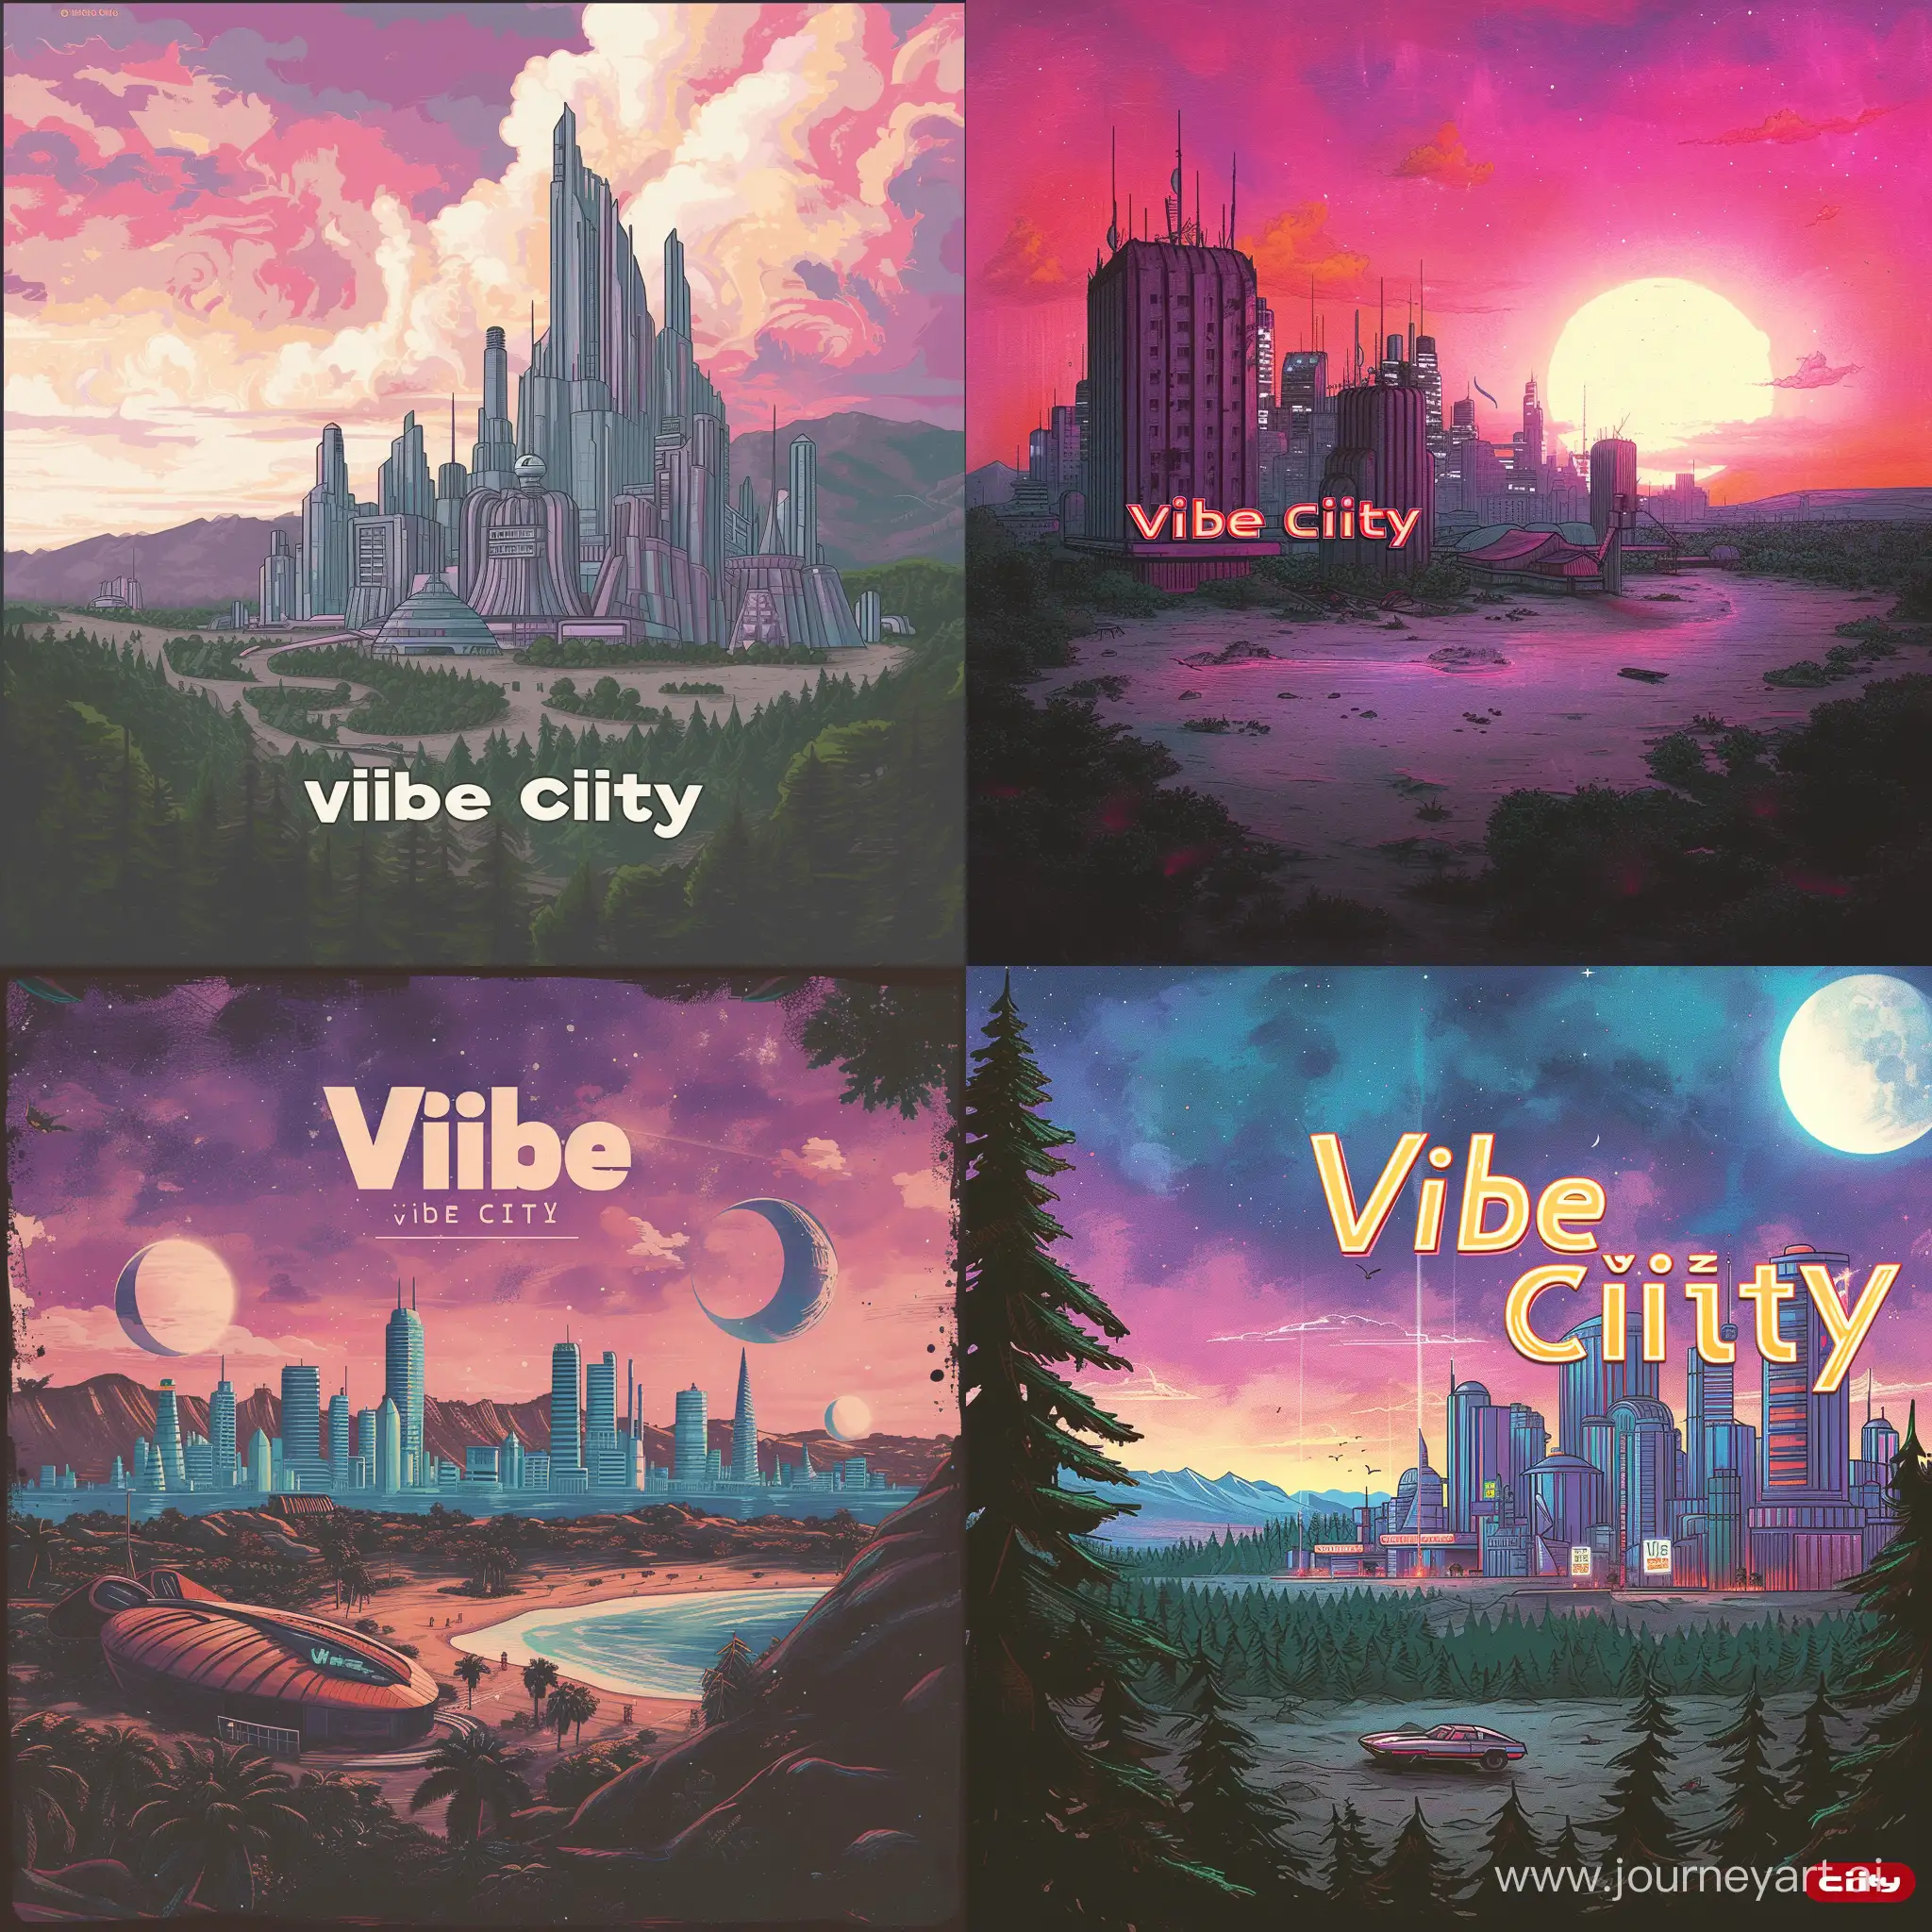 A 70’s retro style city, with the words “Viibe Ciity” in the skyline